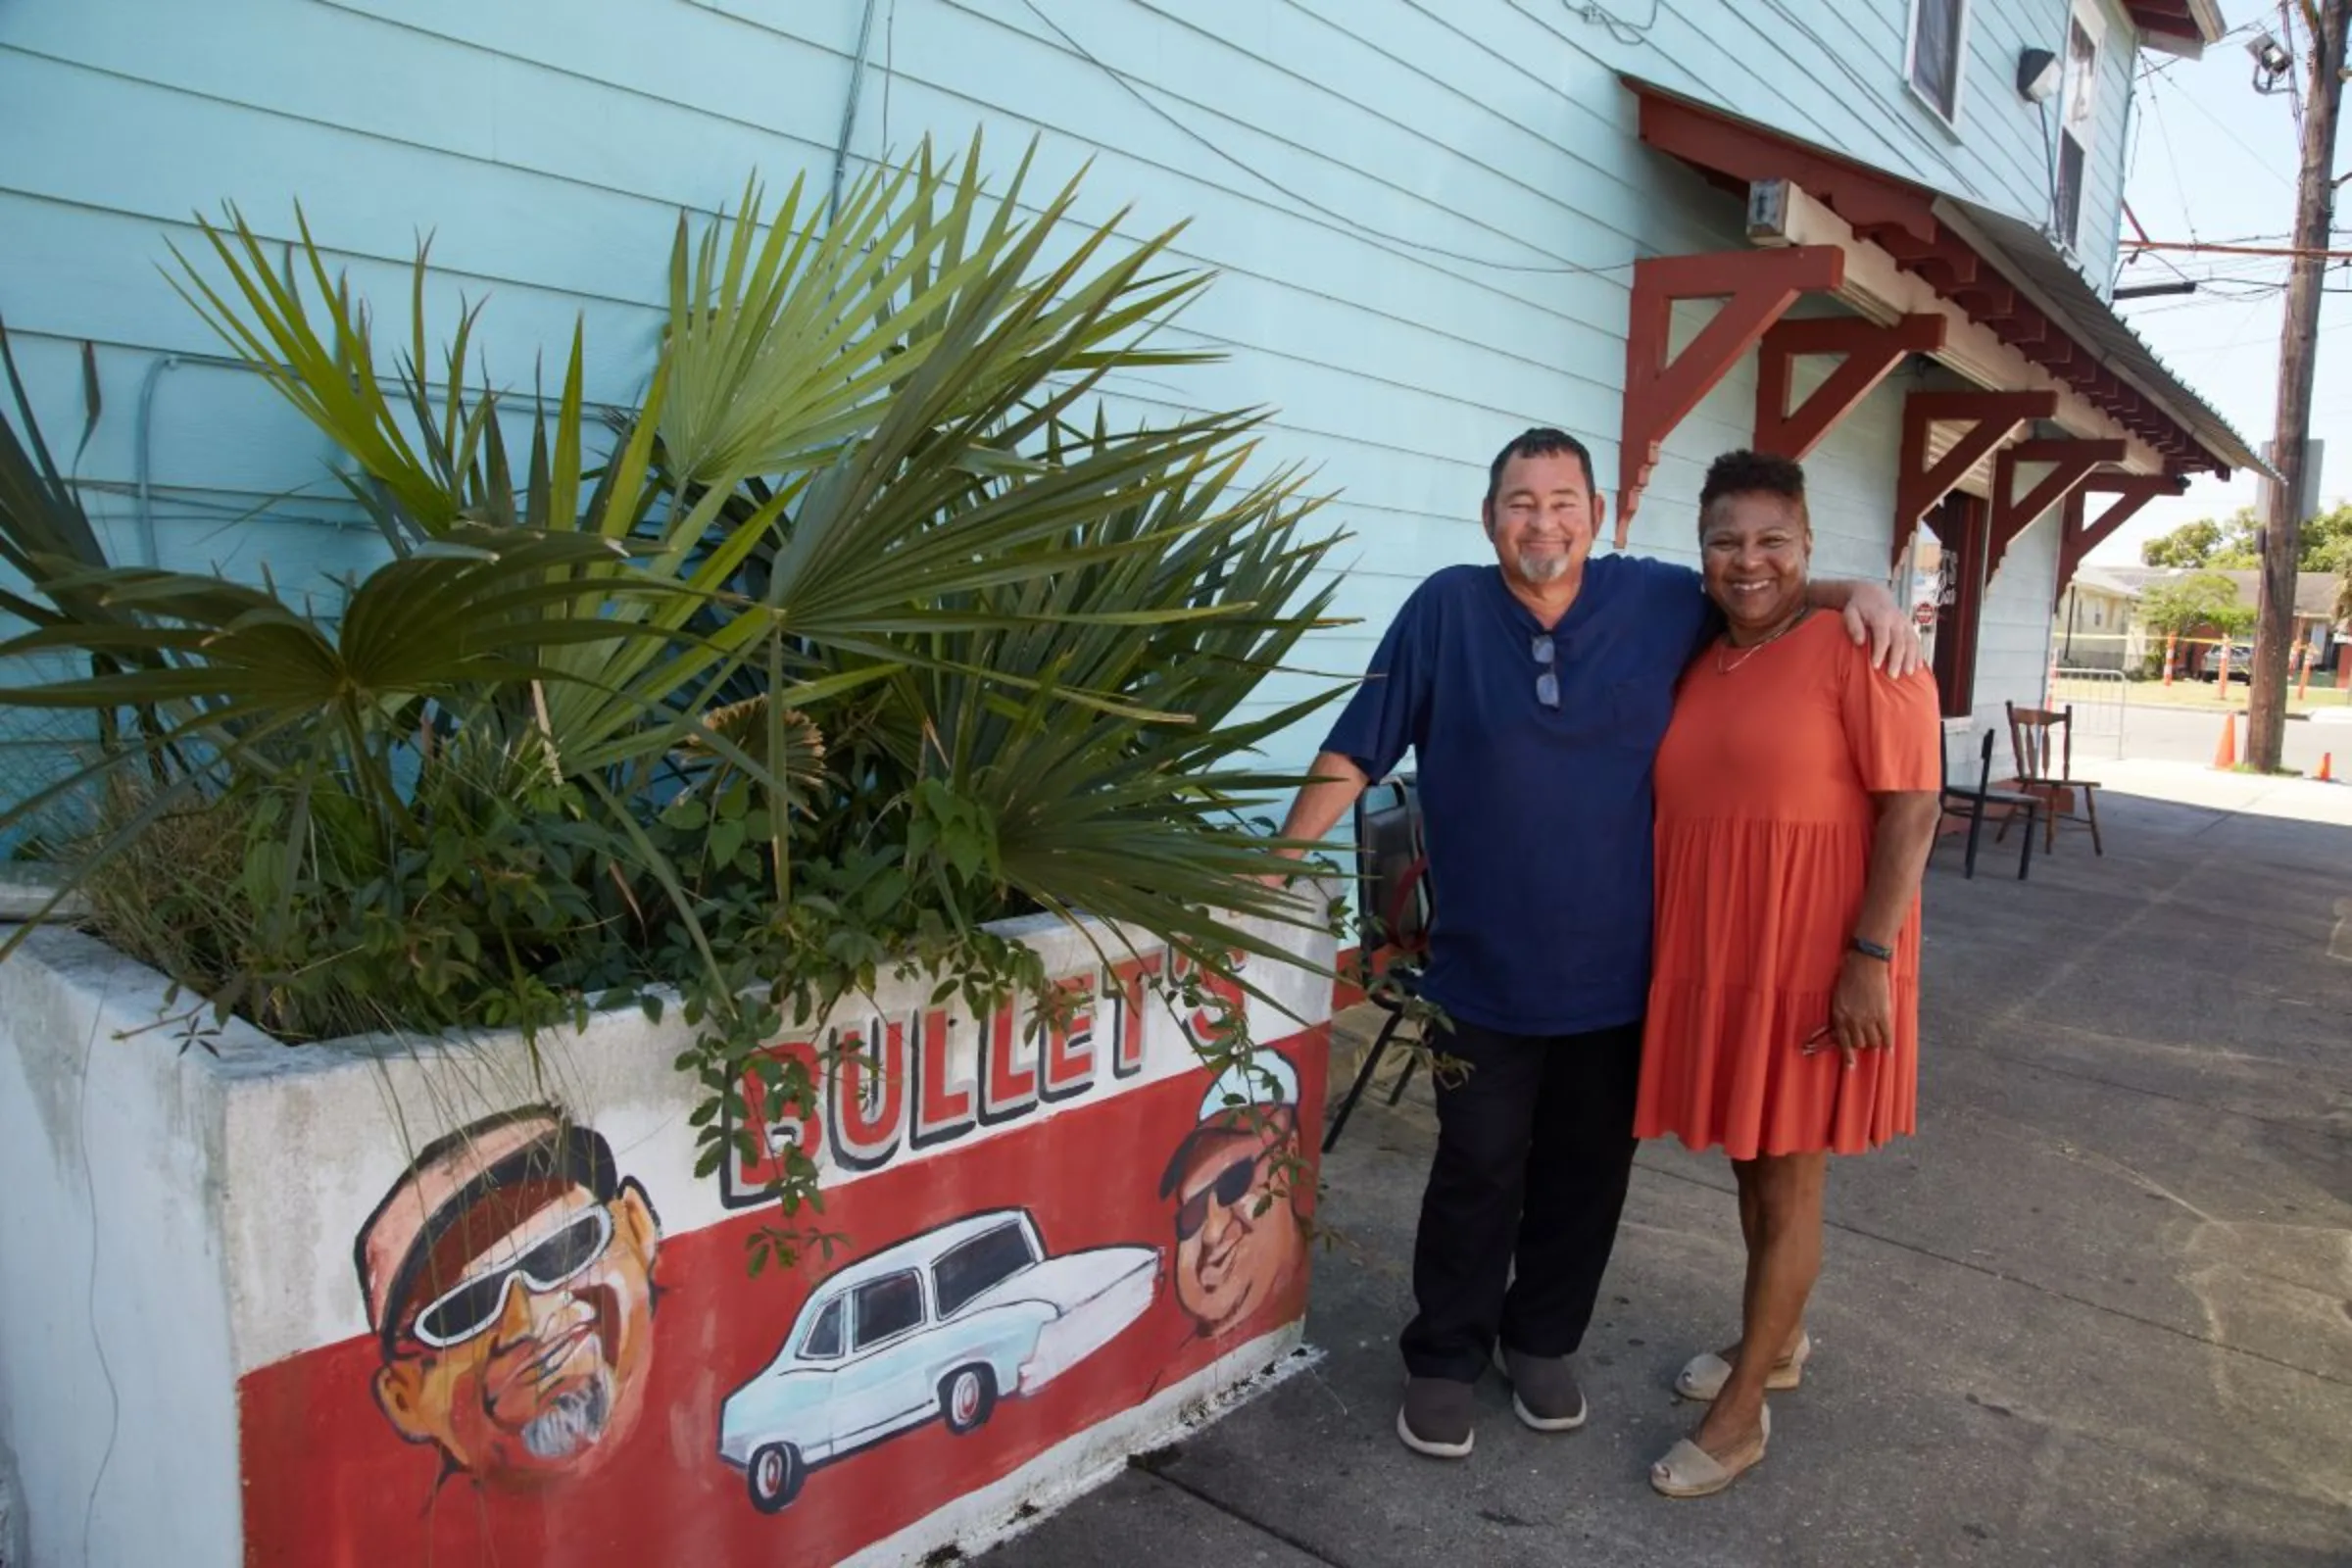 Rollin Garcia, owner of Bullet’s Sports Bar, and Angela Chalk, executive director of Healthy Community Services, pose next to a planter box outside Garcia’s bar in New Orleans, Louisiana, USA, April 19, 2023